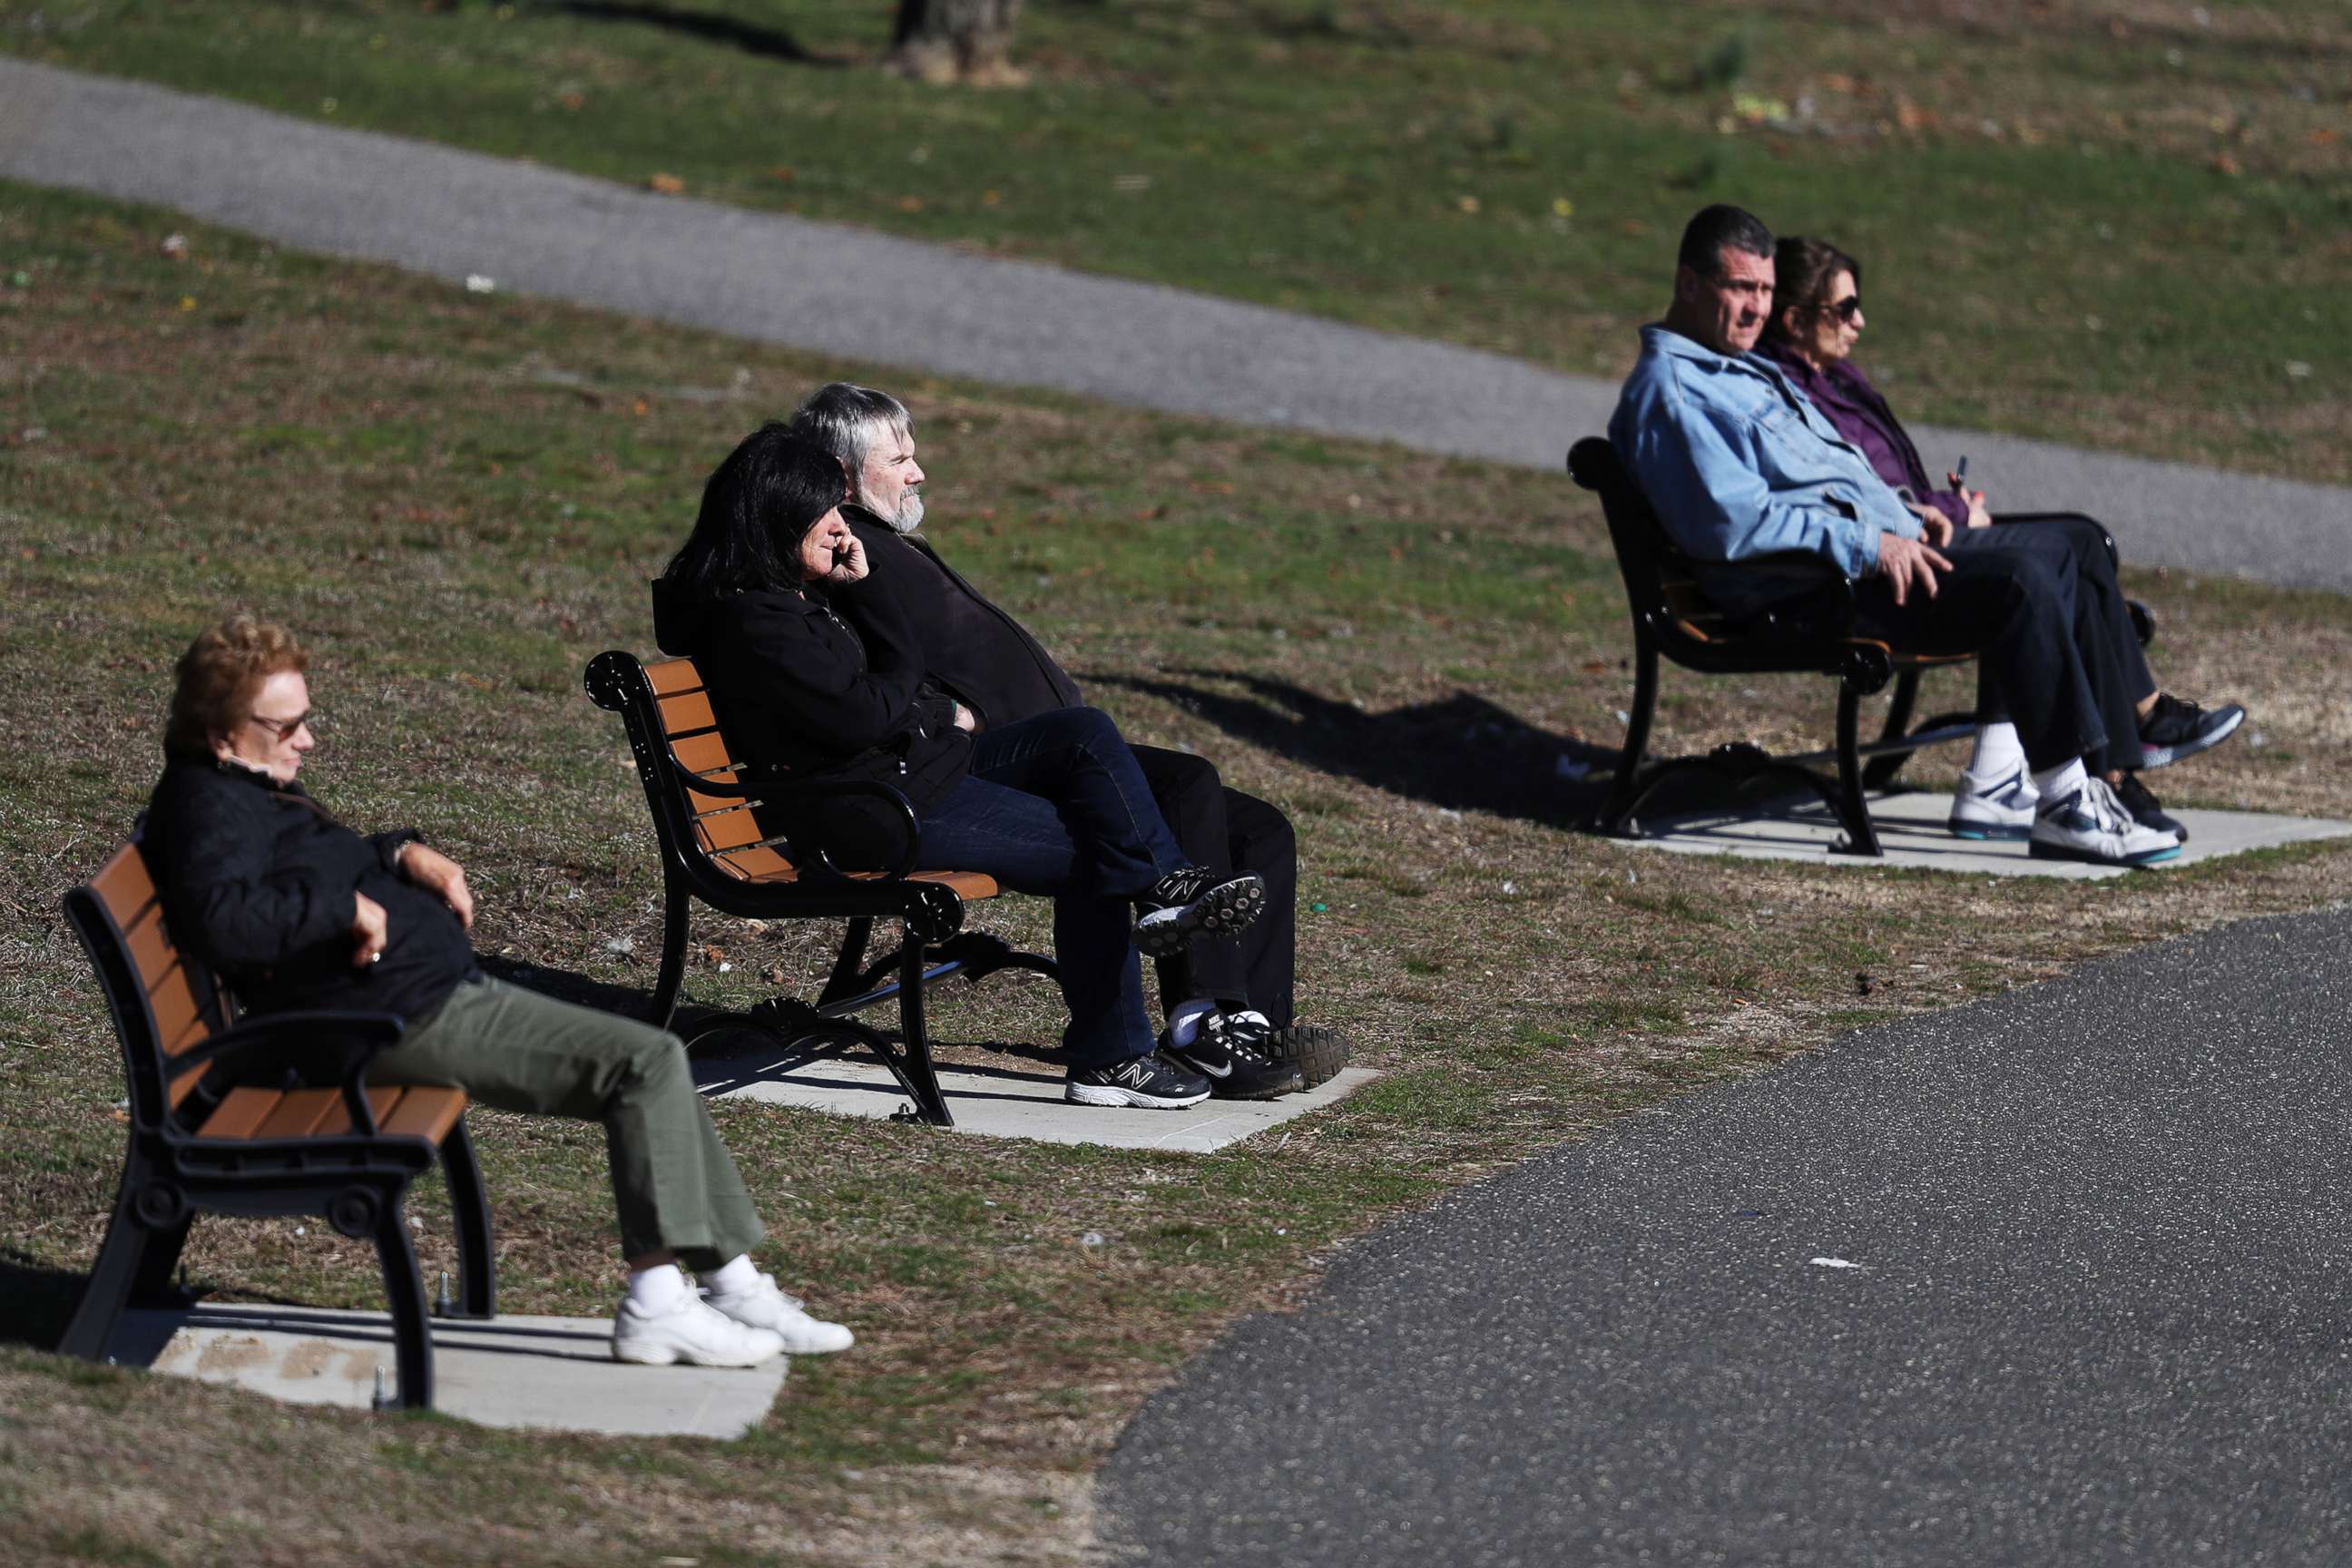 PHOTO: People sit on a park bench at Eisenhower Park, on March 21, 2020, in East Meadow, New York. Authorities have encouraged people keep a social distance of six feet or more to curtail the spread of the coronavirus.